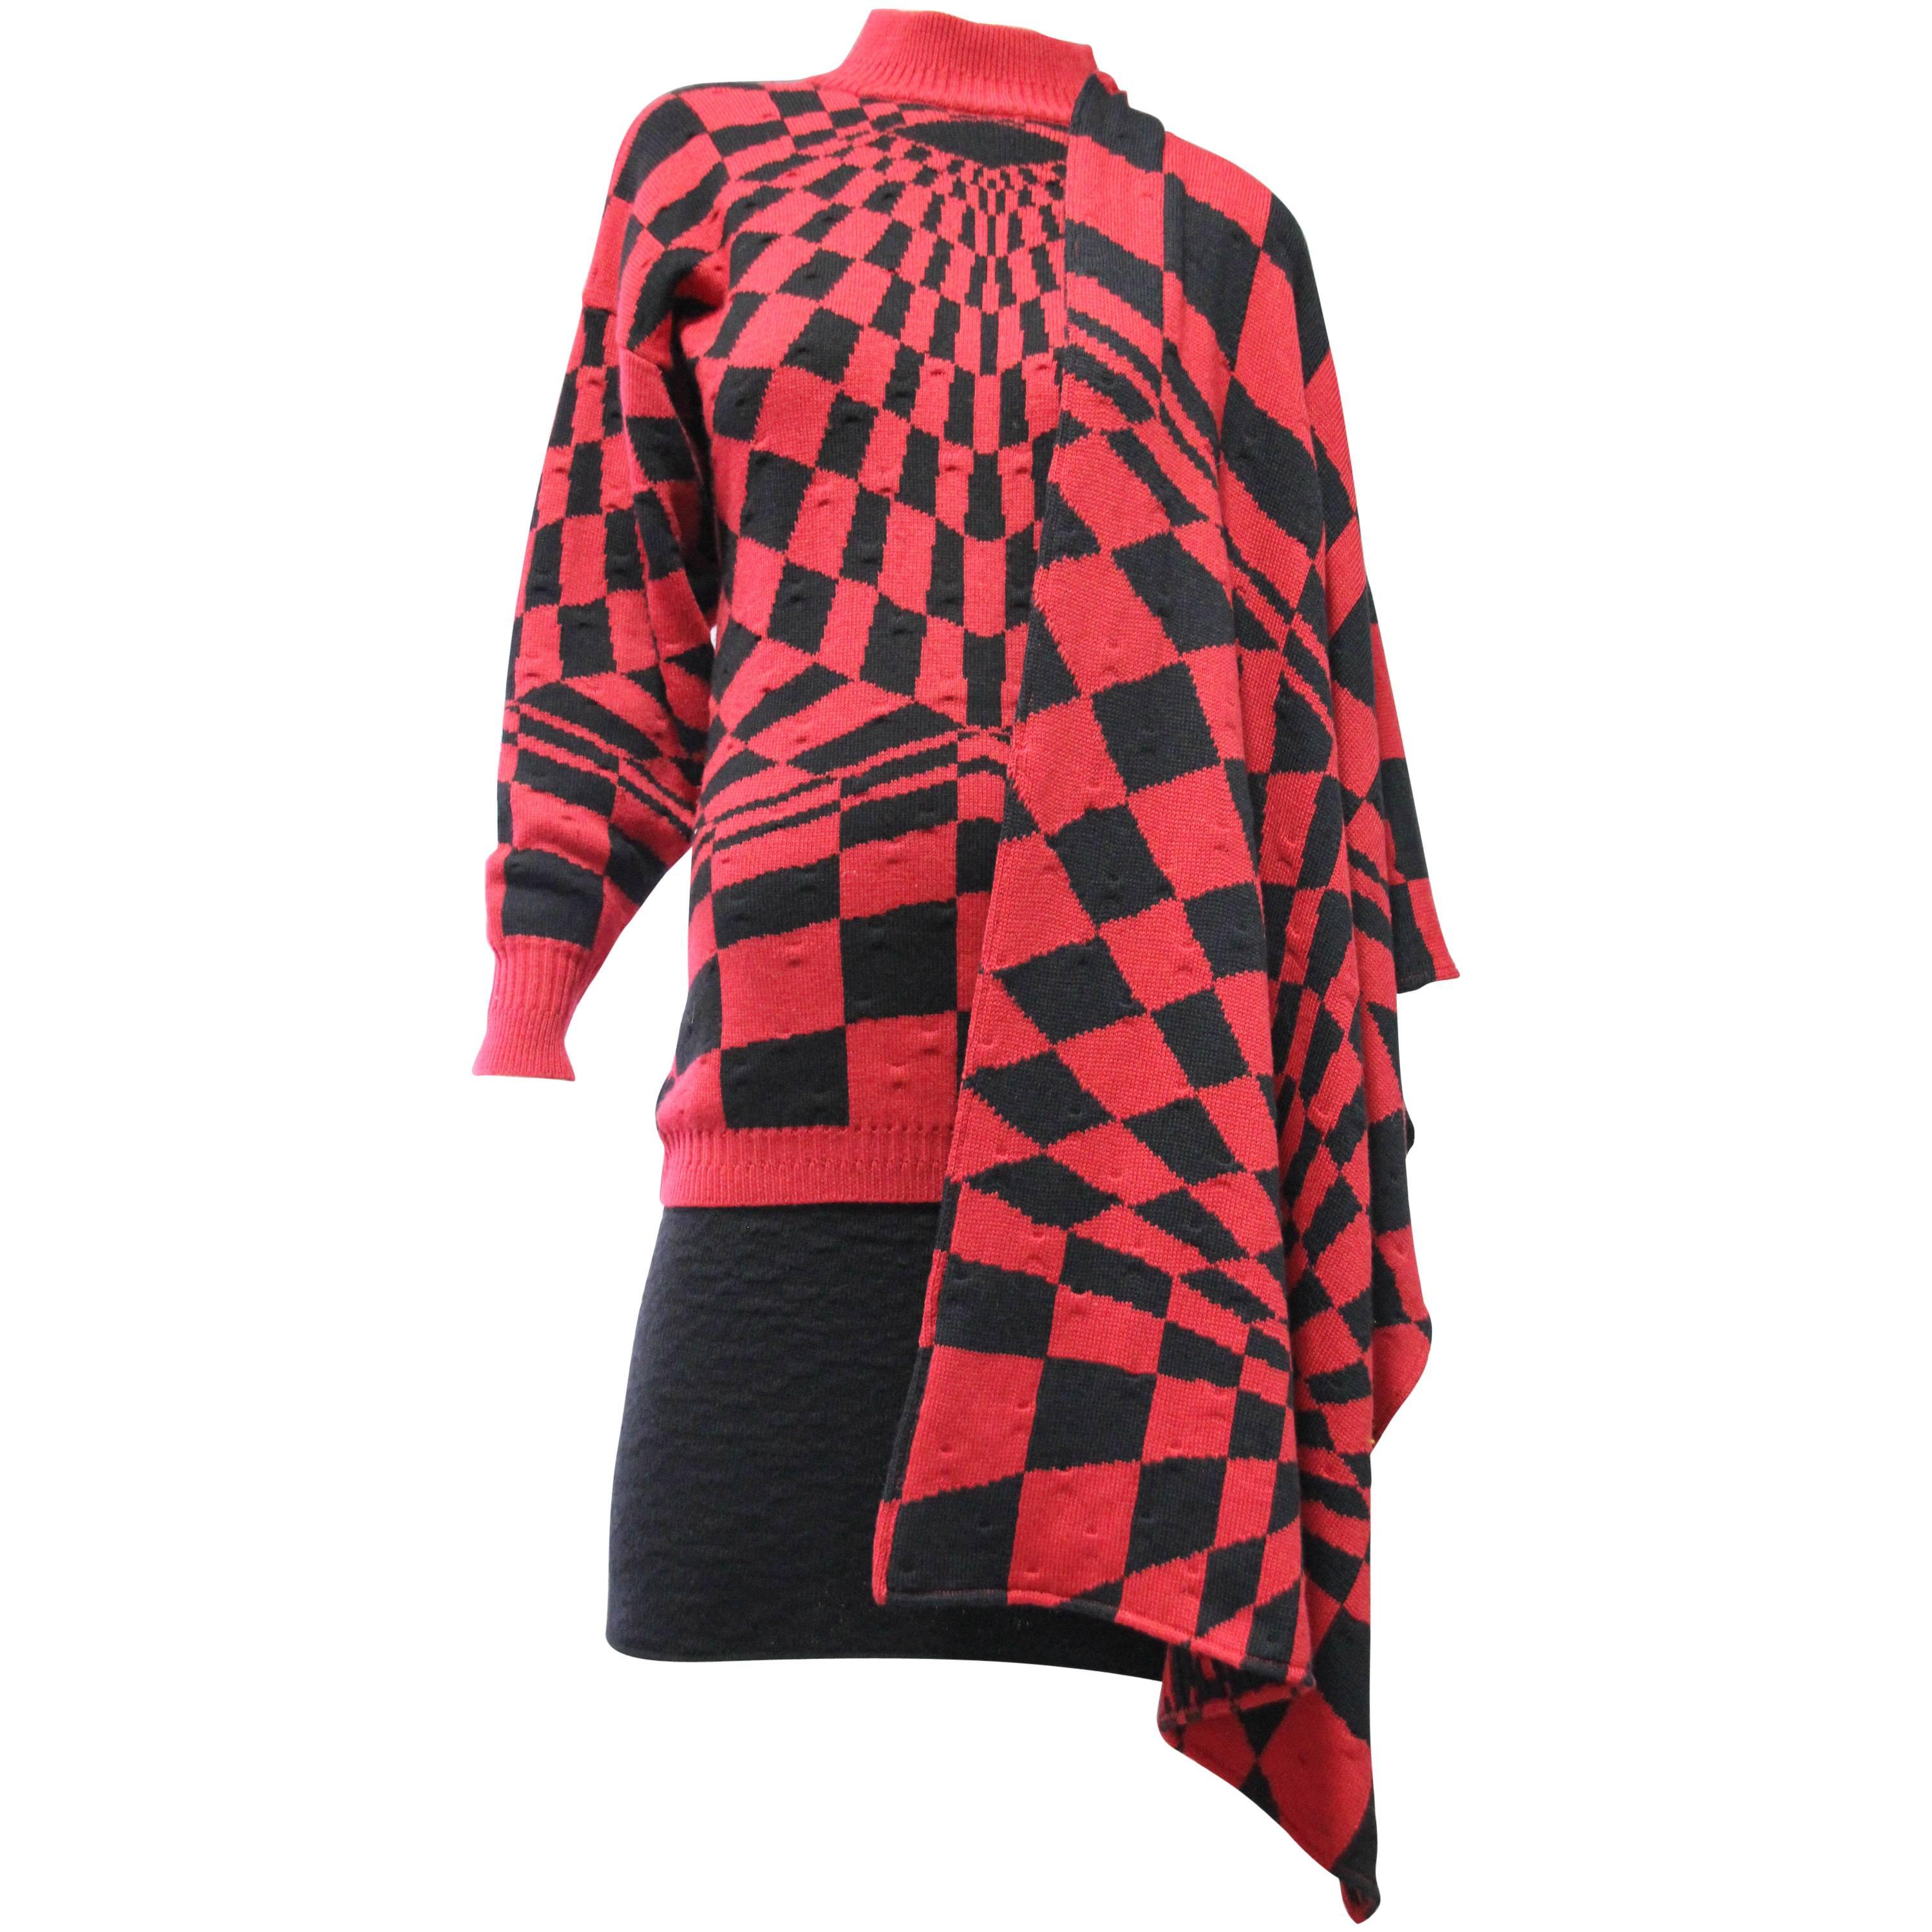 1980s Gianni Versace 3-Piece Knit Skirt Sweater & Scarf in Mod Red Checkerboard